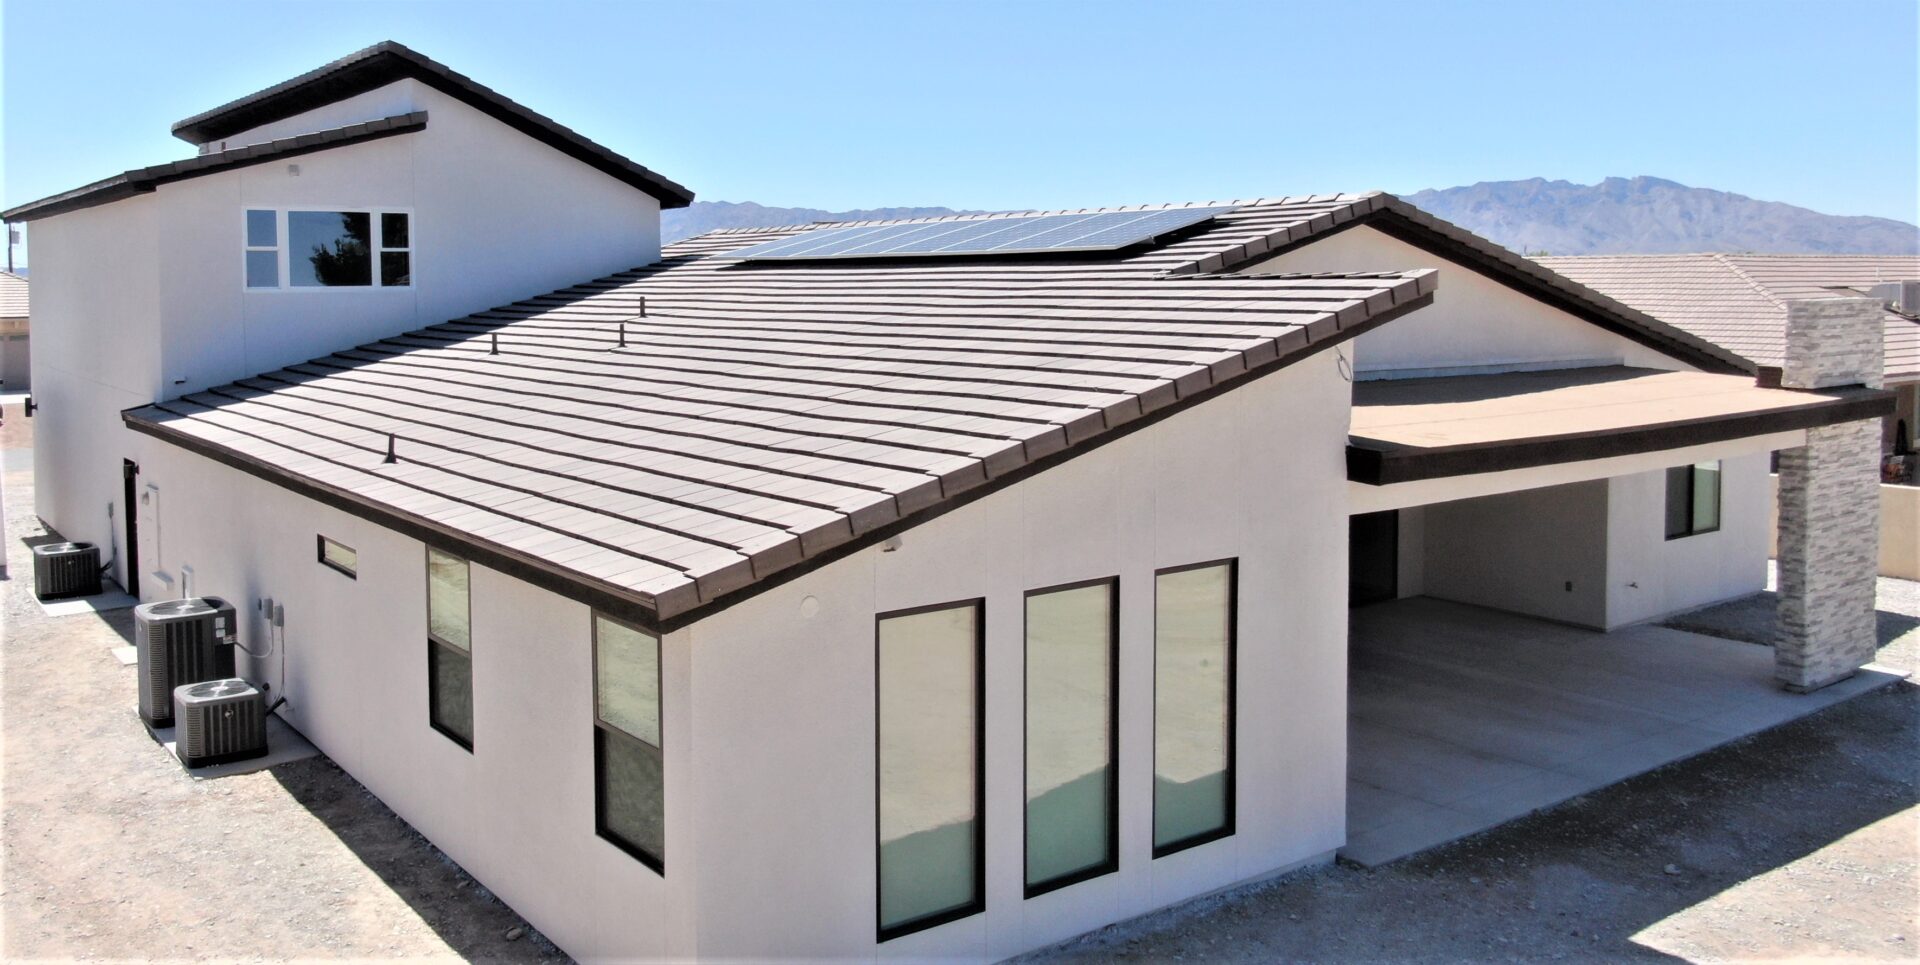 A modern house with solar roofing